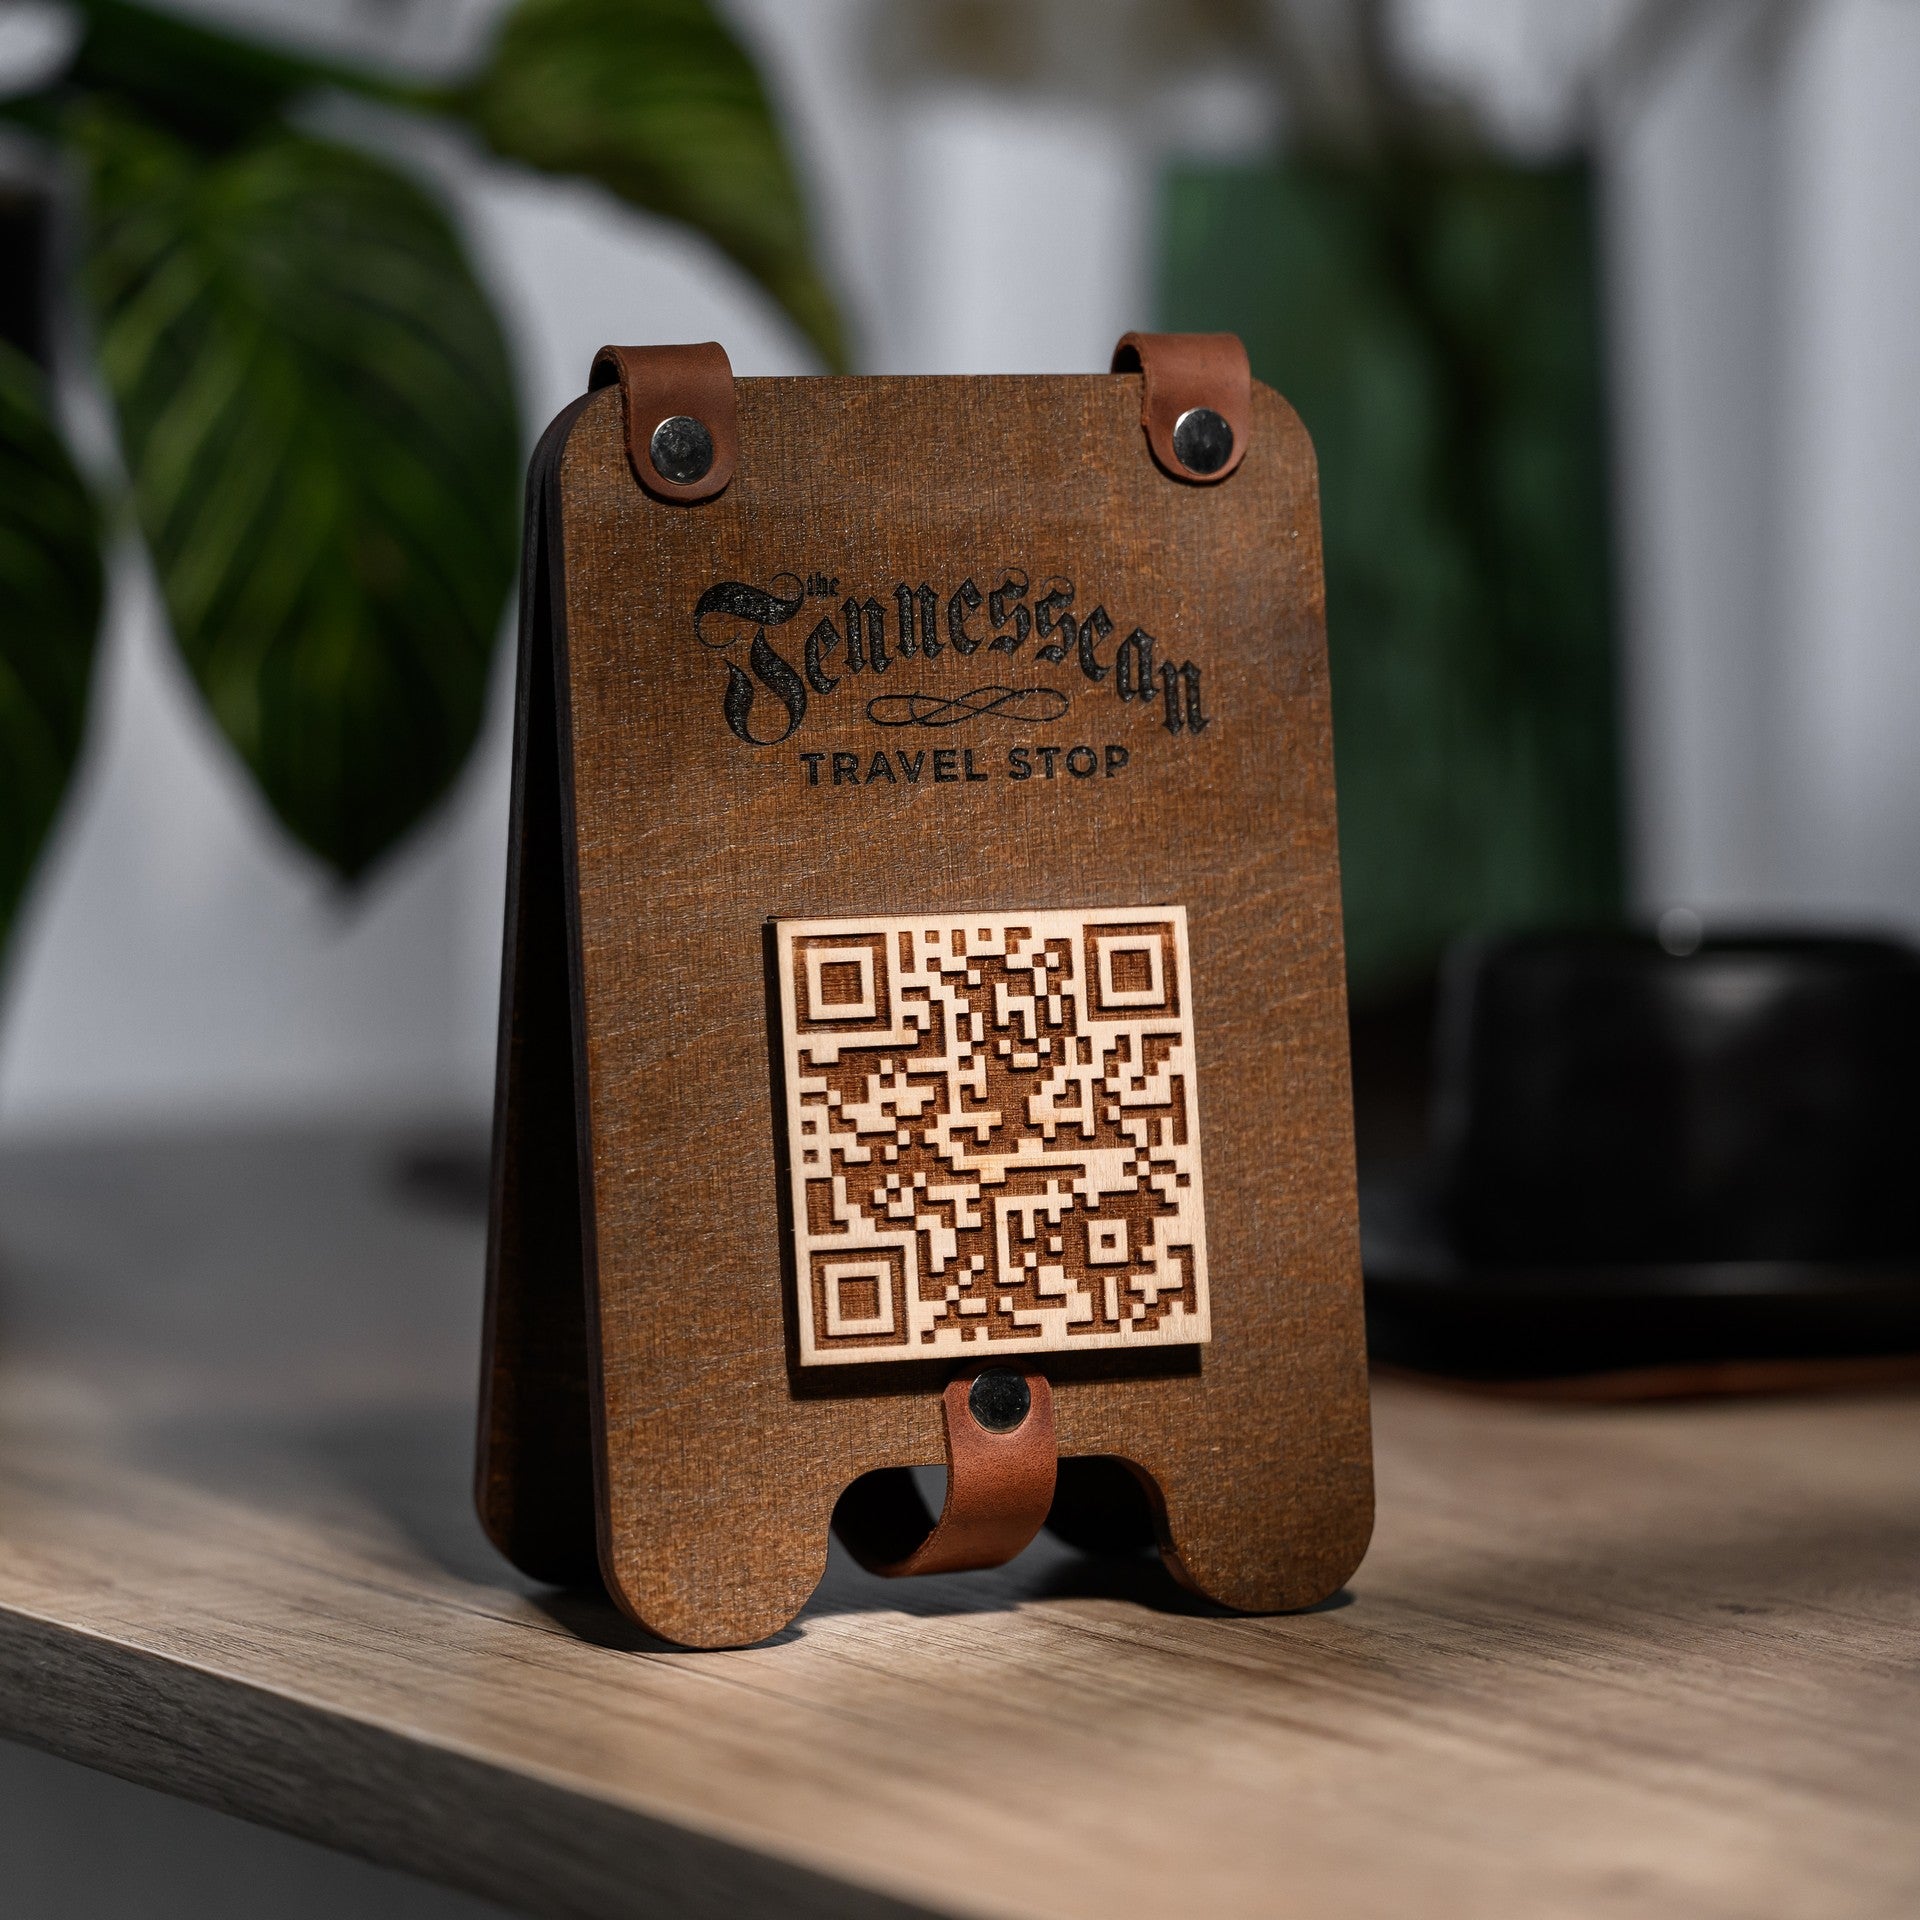 Menu QR Code Stand for cafes and restaurants. Scan to pay sign for quick and easy access to digital menus and payment options.